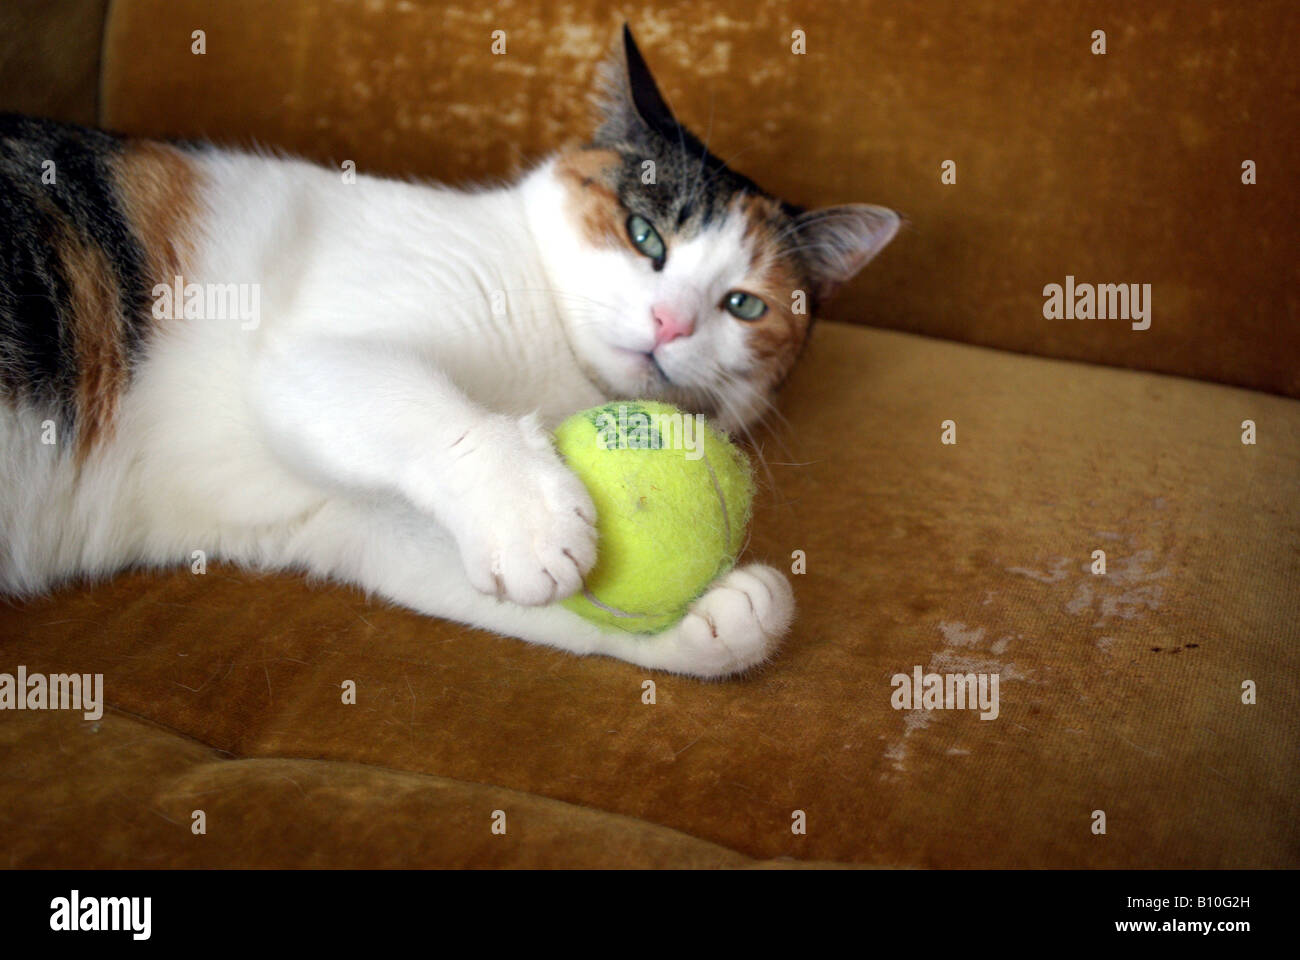 Cat playing with tennis ball Stock Photo - Alamy